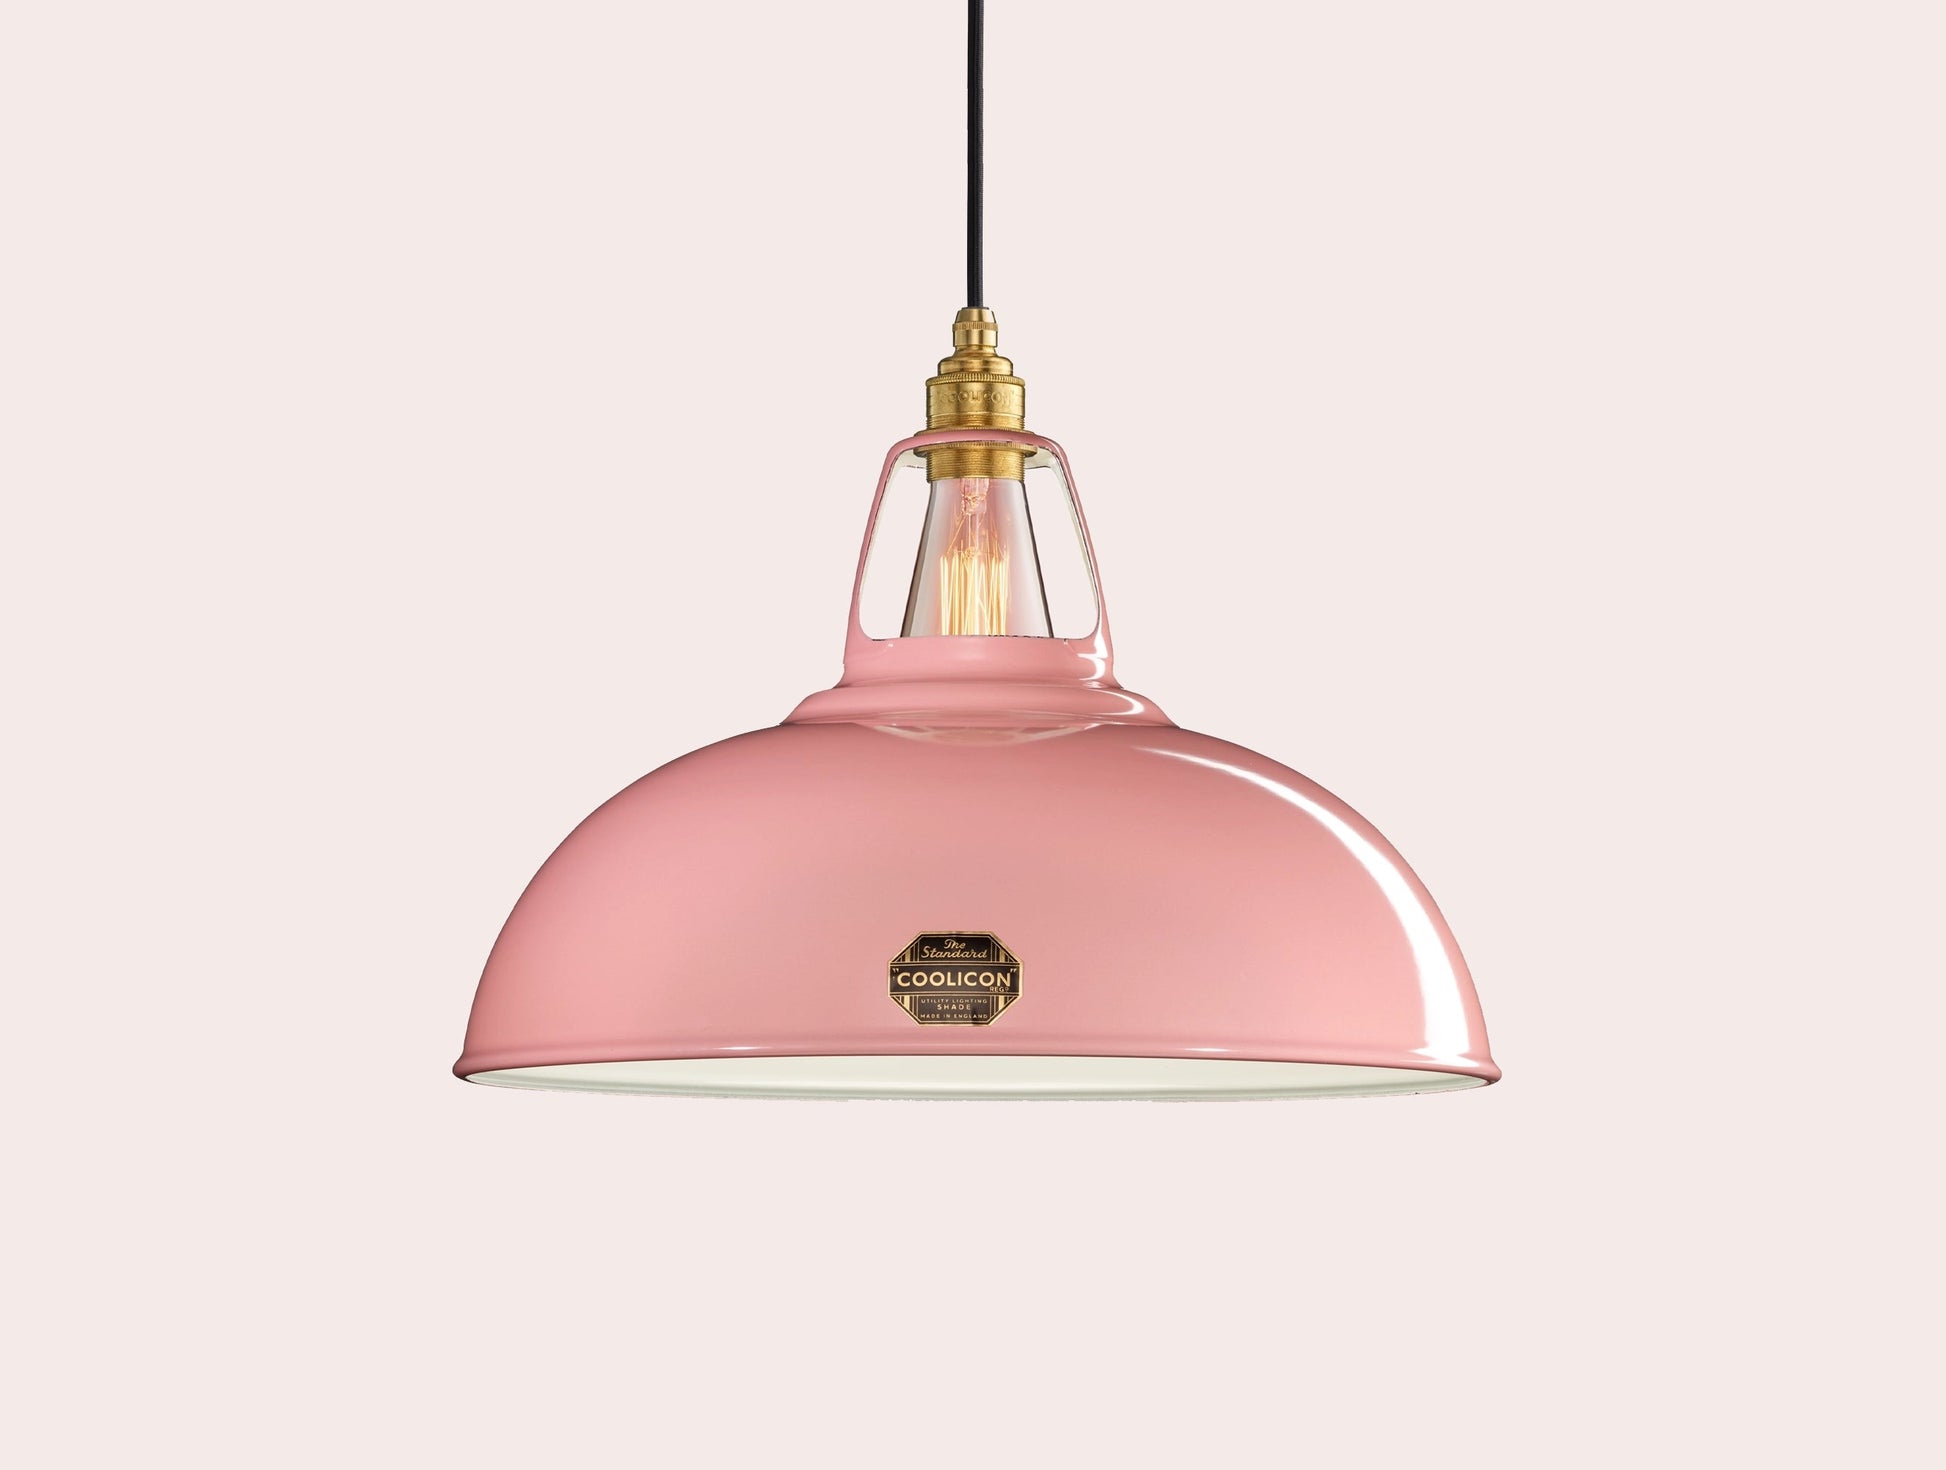 Large Powder Pink Coolicon lampshade with a Brass pendant set over a light pink background